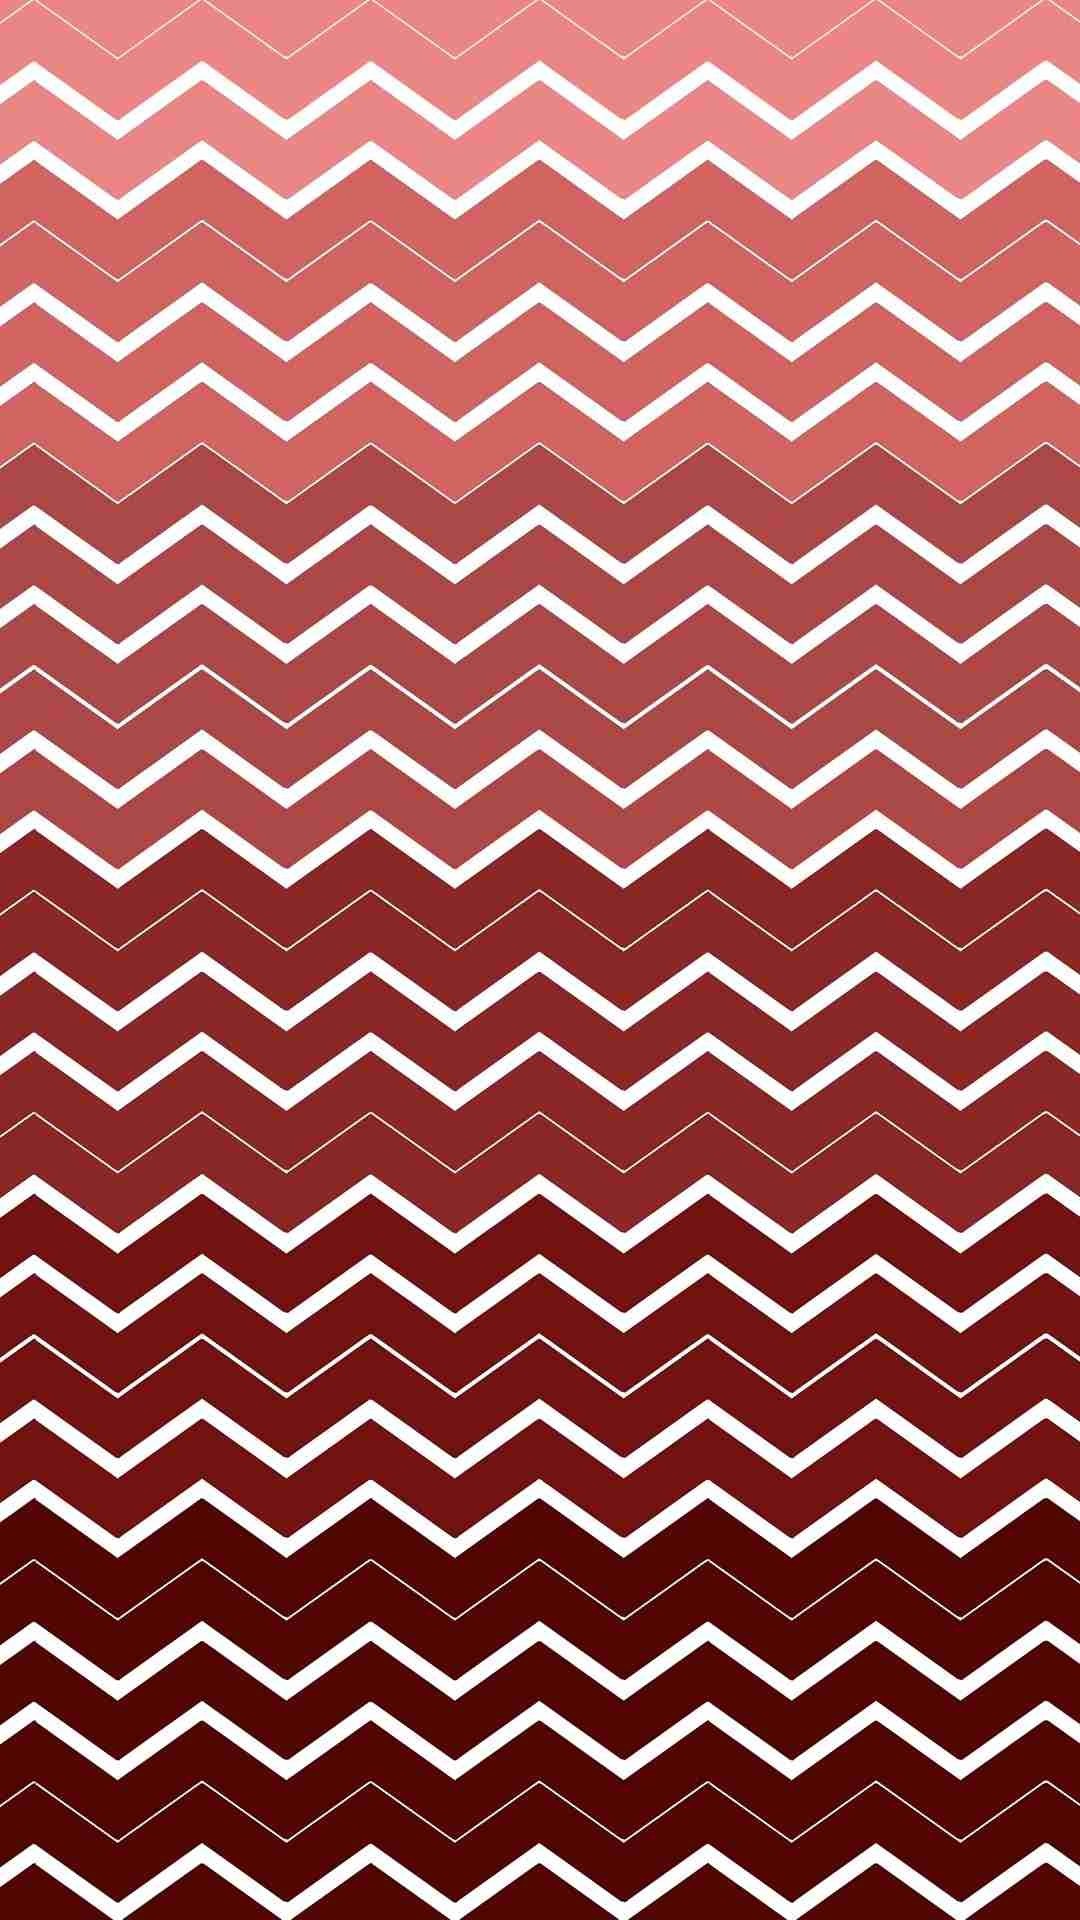 1080x1920 Chevron and Zigzag Pattern iPhone 6 Plus Wallpaper - Ombre Red and White  #iPhone #